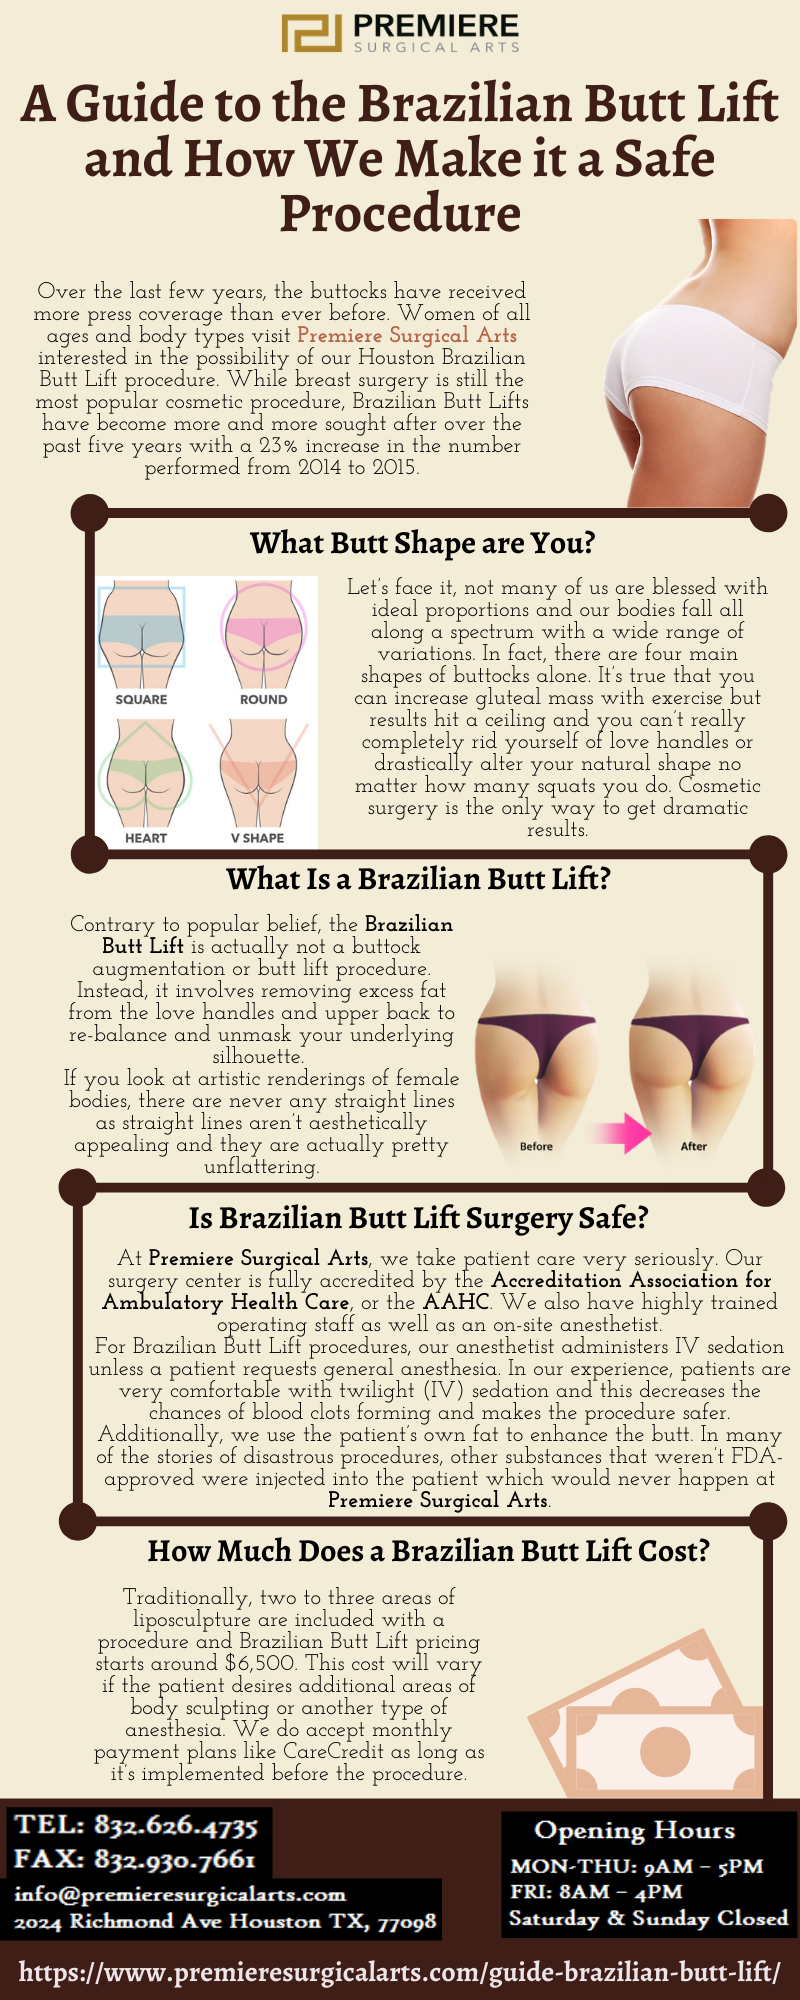 A Guide to the Brazilian Butt Lift - PREMIERSURGICALARTS